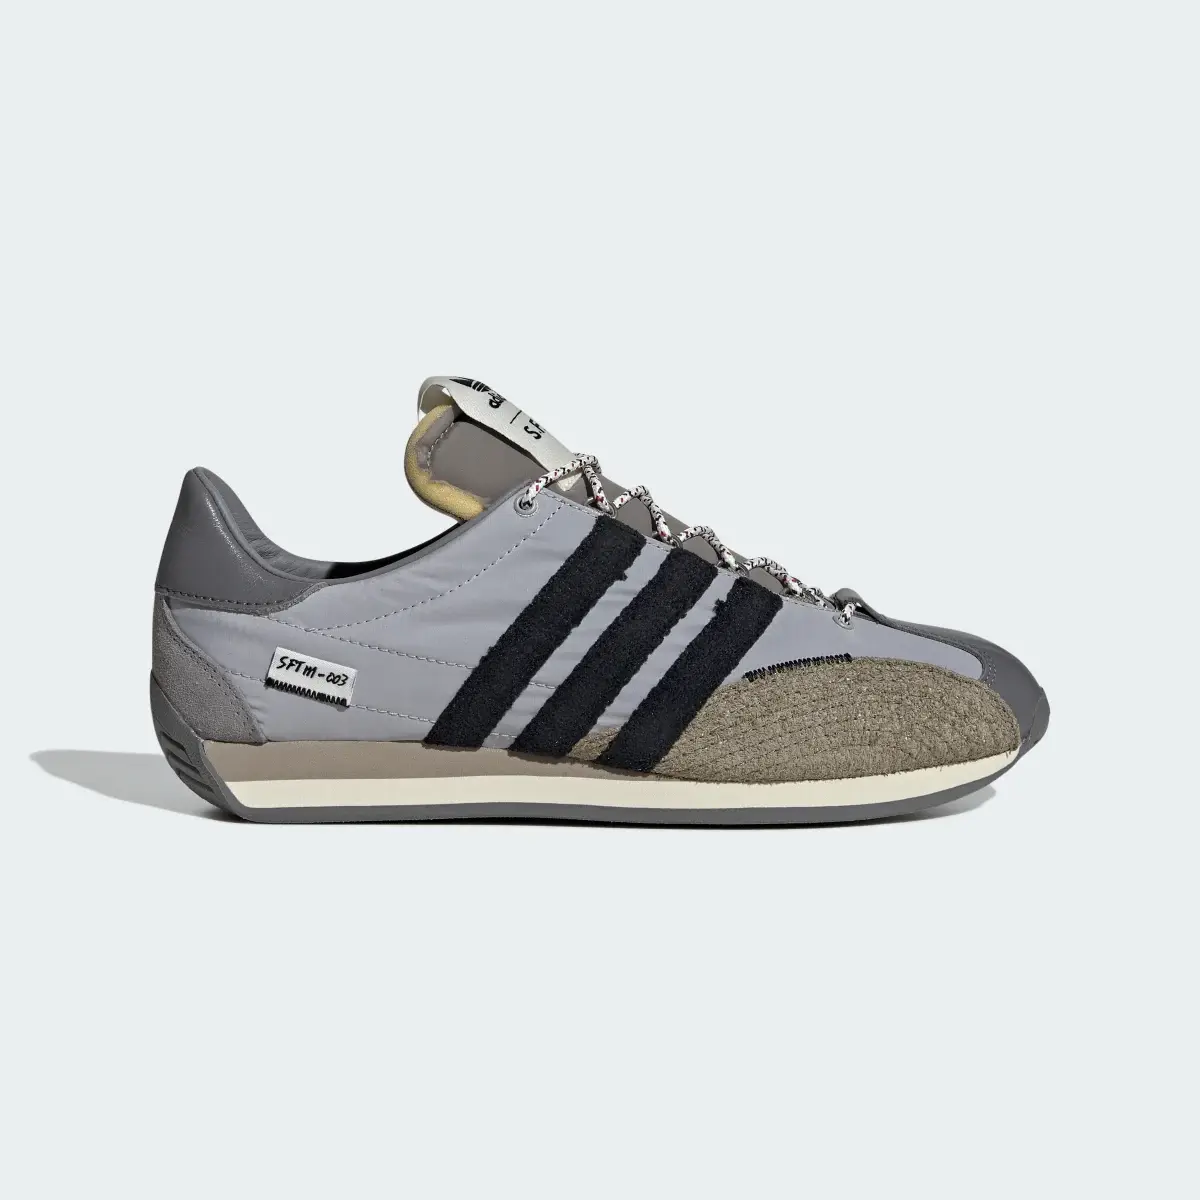 Adidas Country OG Low Trainers. 2